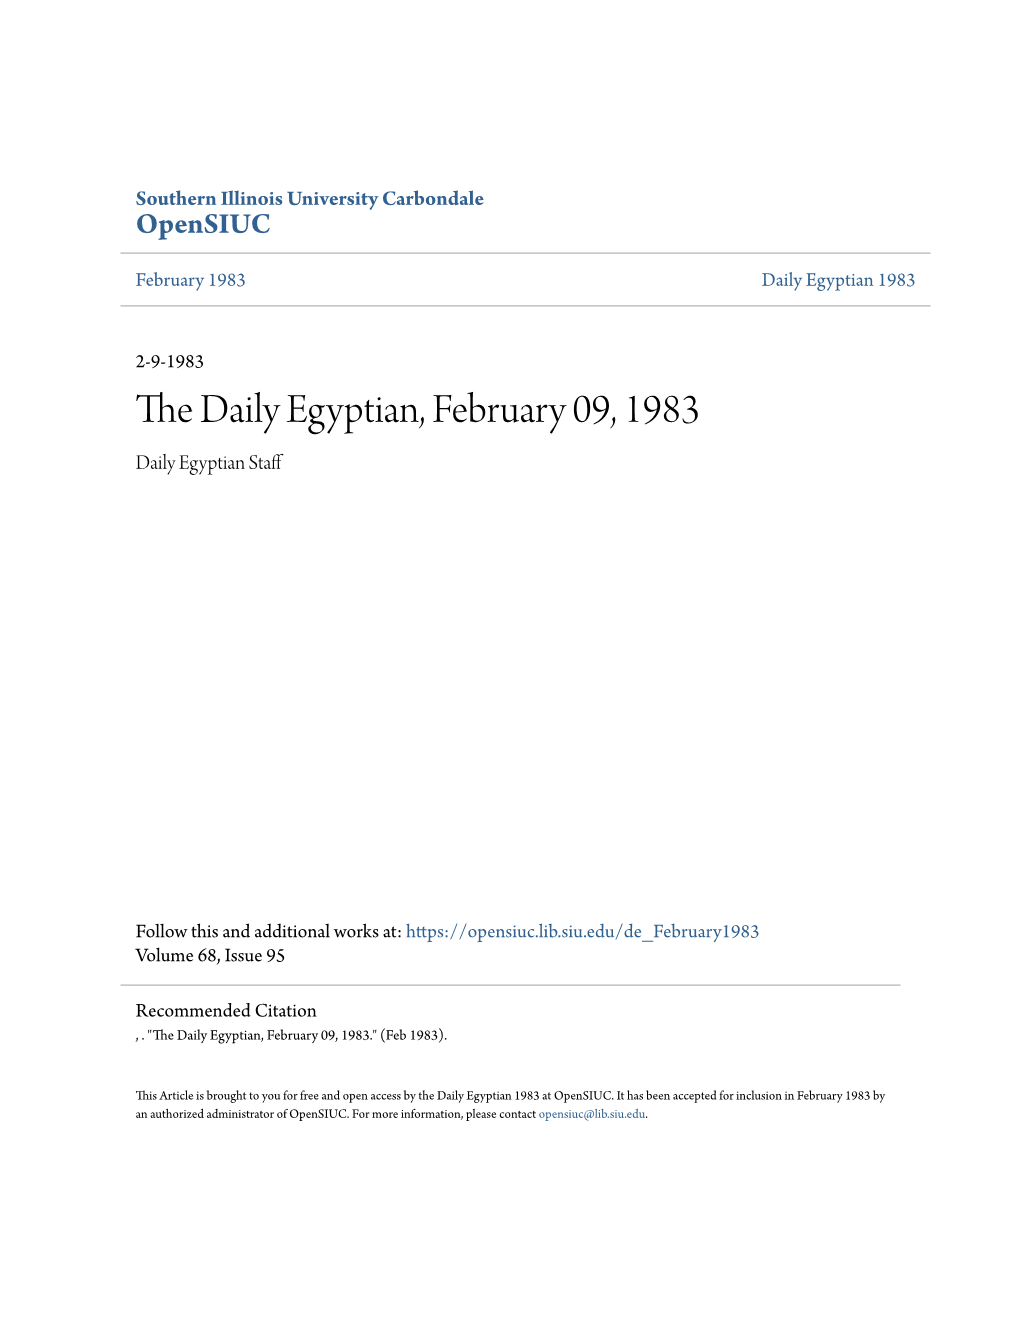 The Daily Egyptian, February 09, 1983